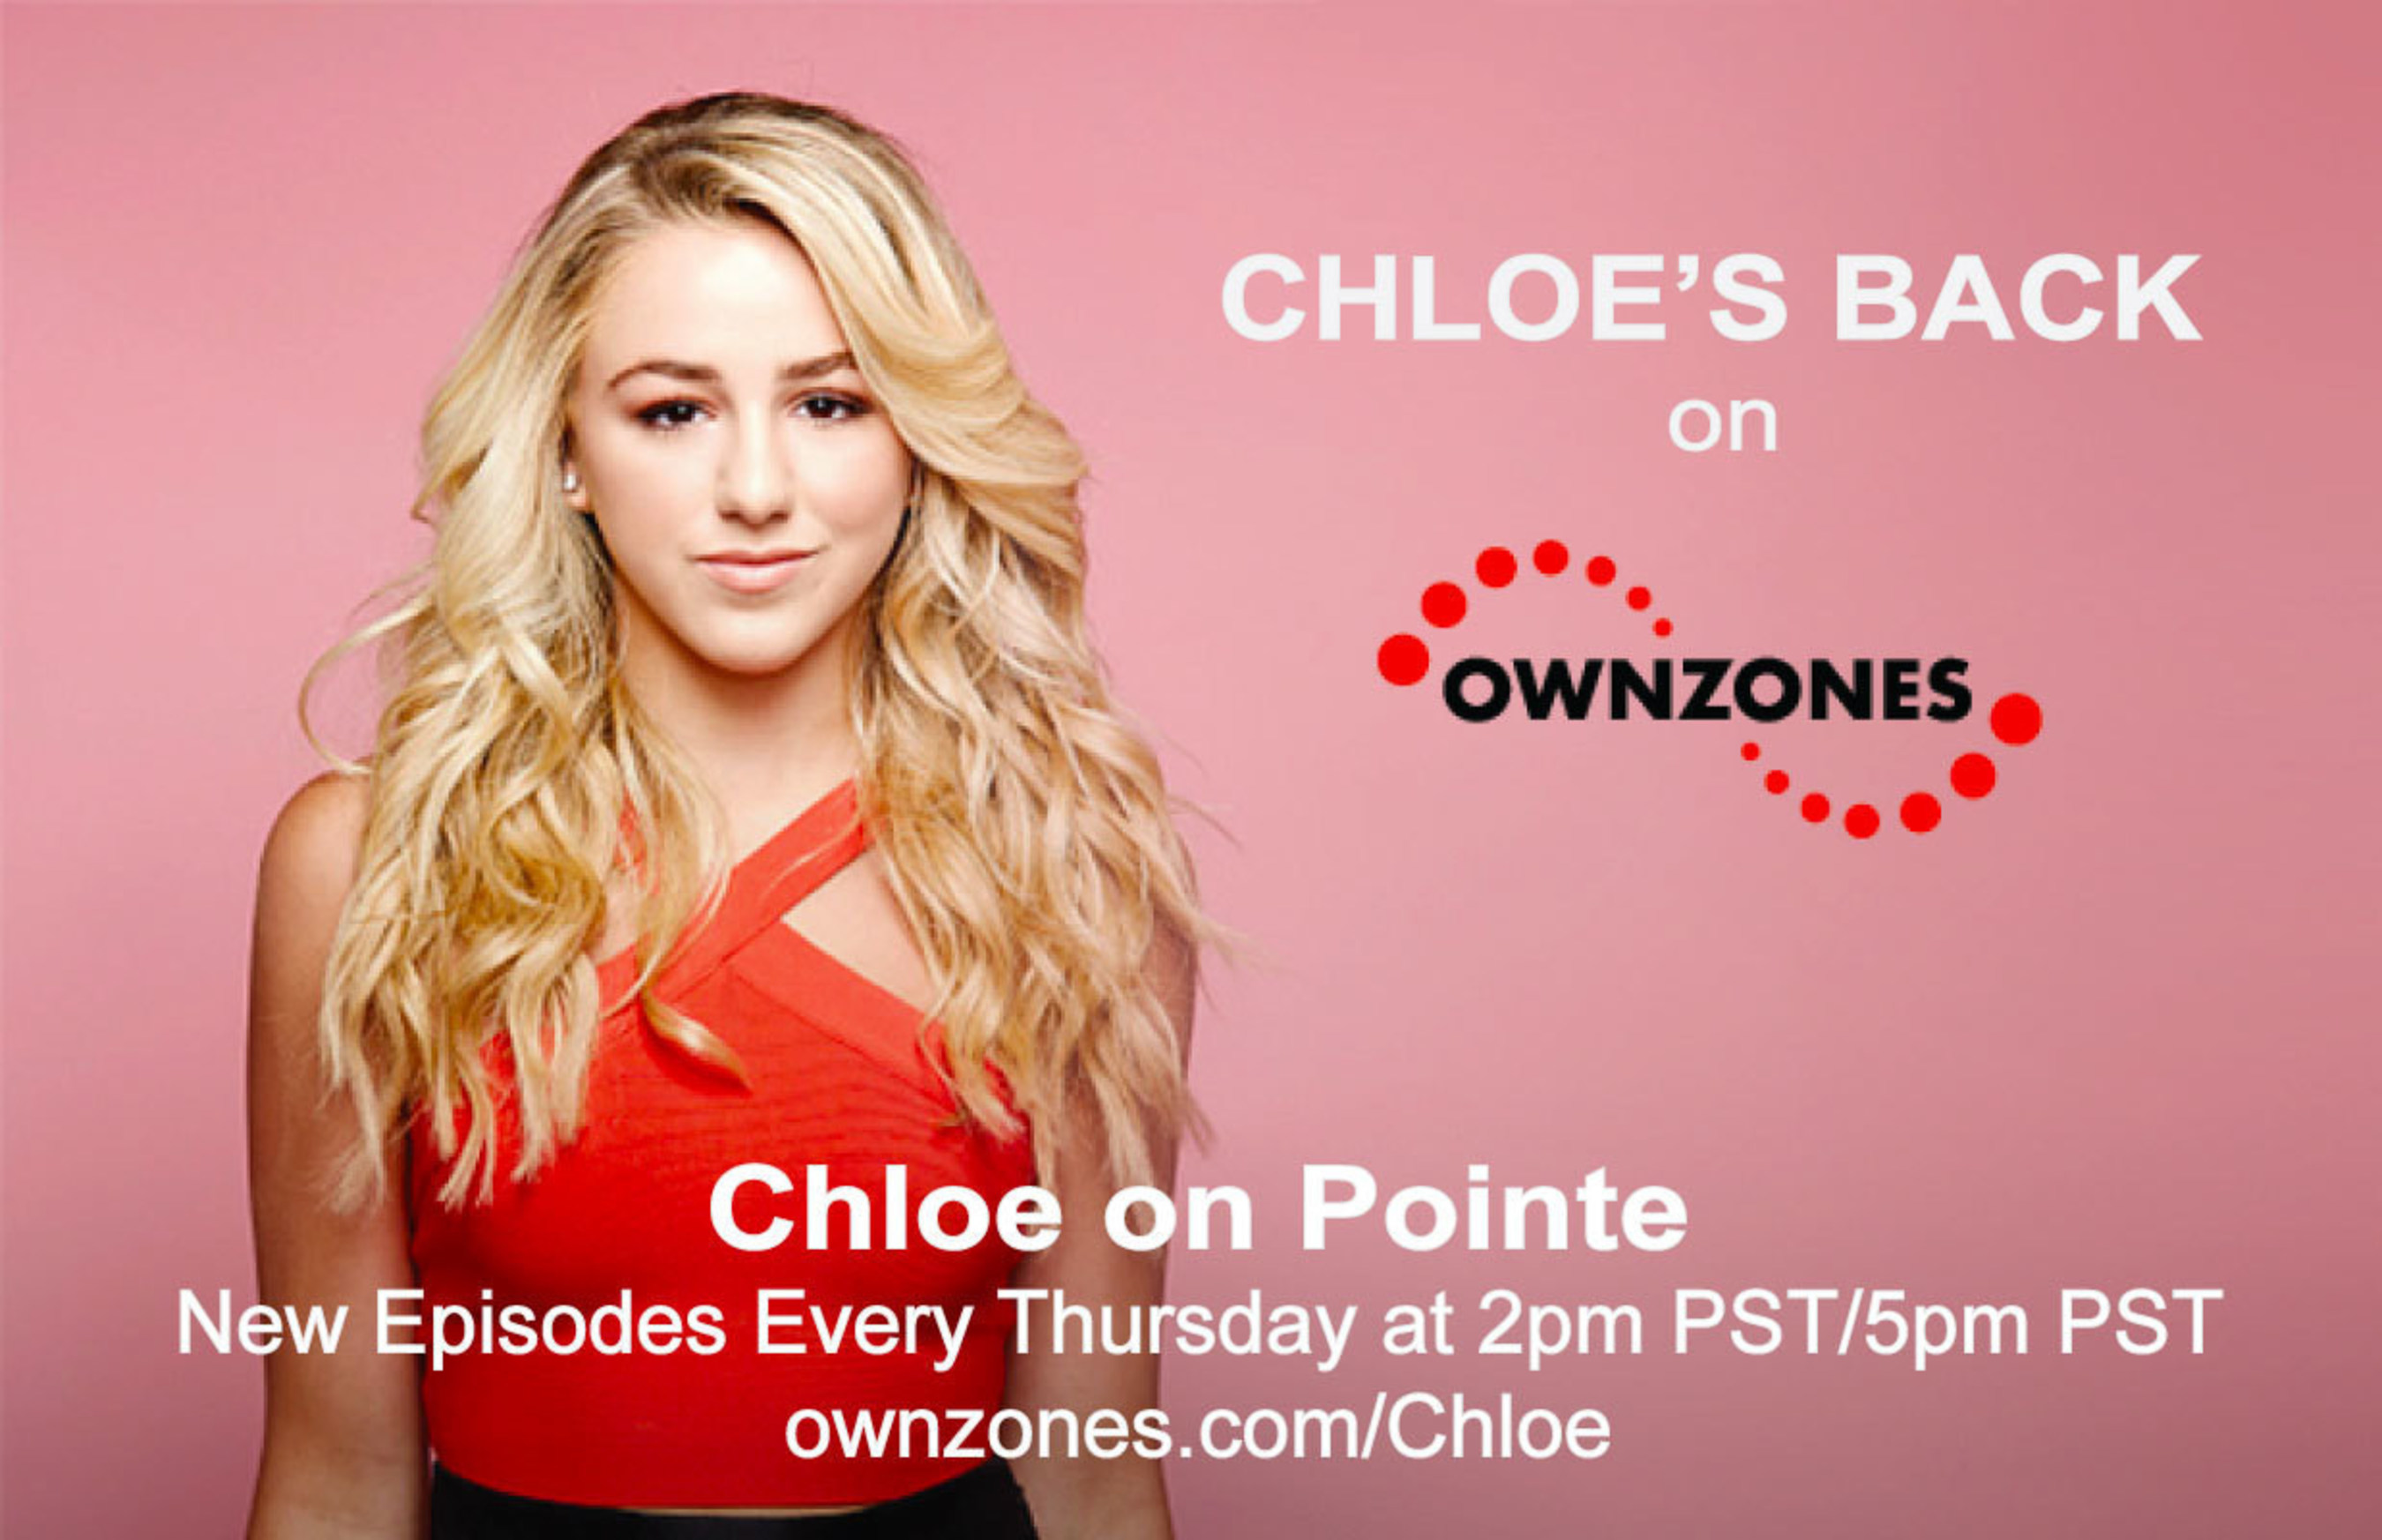 'Chloe On Pointe' only on OWNZONES Media Network. Watch for Exclusive Video Blogs, Behind-the-scenes Content, Favorite On-stage Performances and Entertaining Dance Tutorials From Reality Star and Breakout Dance Phenom, Chloe Lukasiak